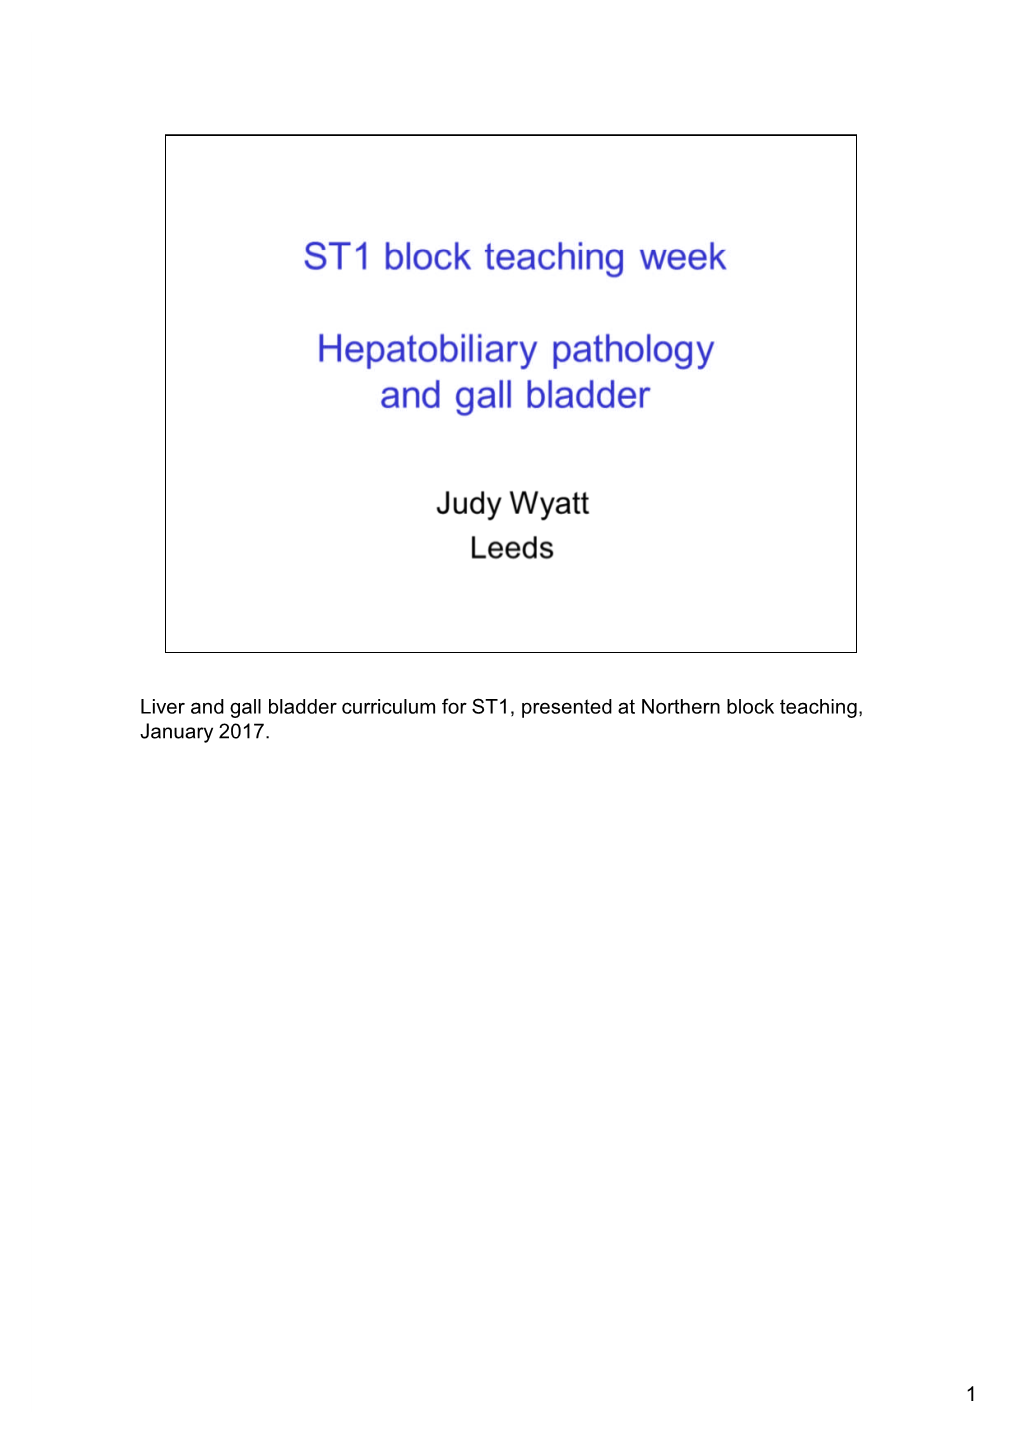 Liver and Gall Bladder Curriculum for ST1, Presented at Northern Block Teaching, January 2017